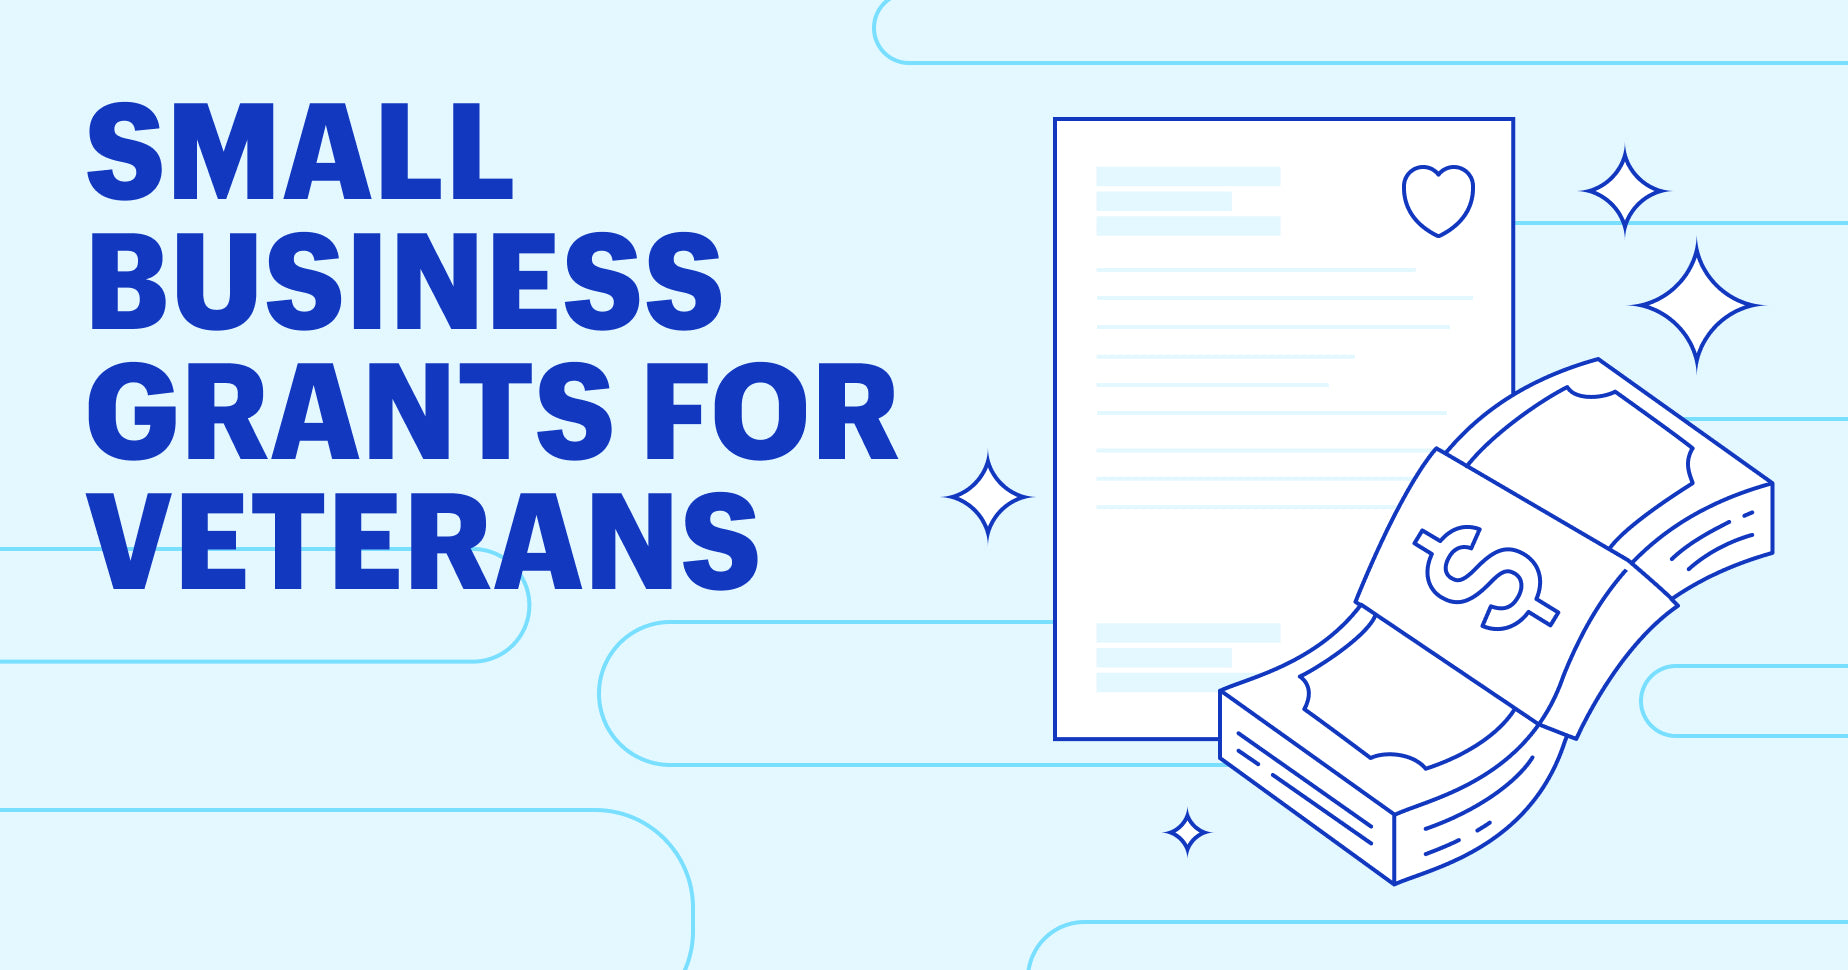 small business grants for veterans text and a wad of cash currency